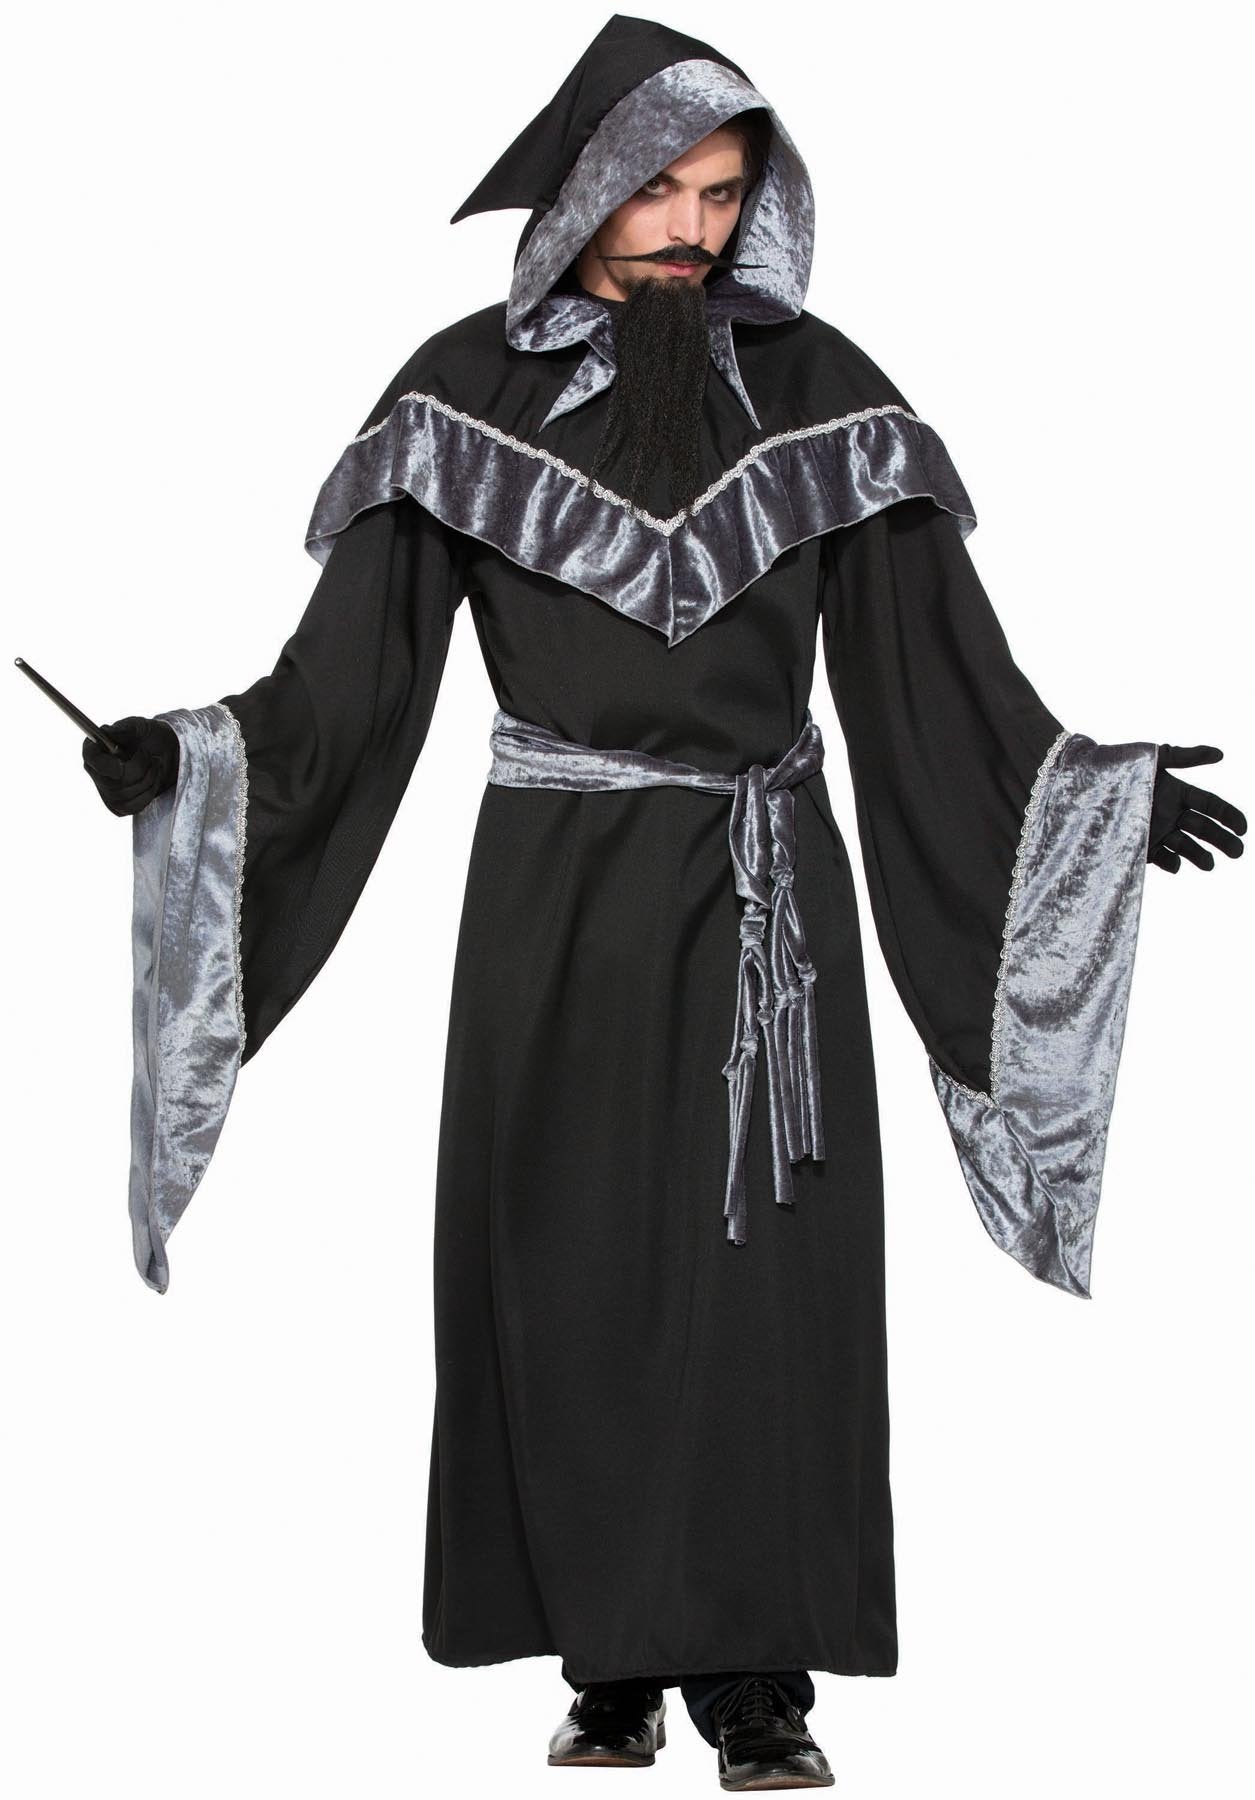 Black and silver hooded robe and belt